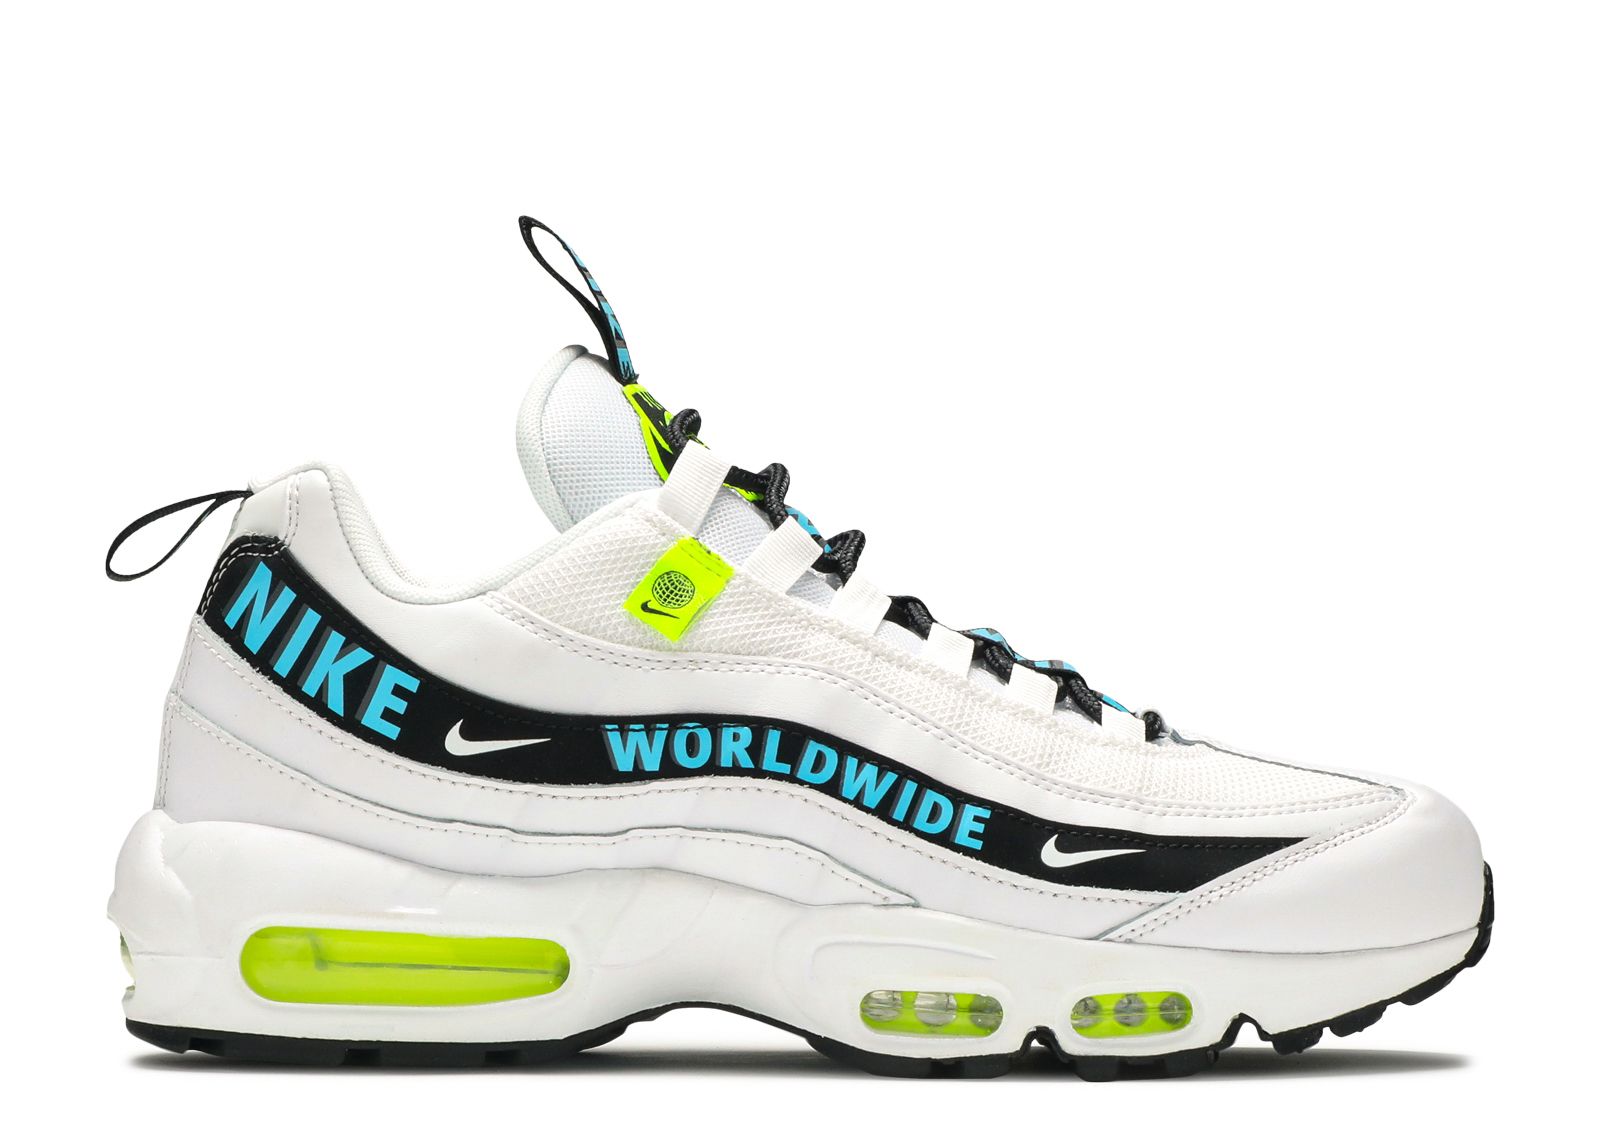 Кроссовки Nike Air Max 95 'Worldwide Pack - White', белый authentic nike air max 95 men cherry blossom worldwide pack yin yang running shoes original trainers sports sneakers runners